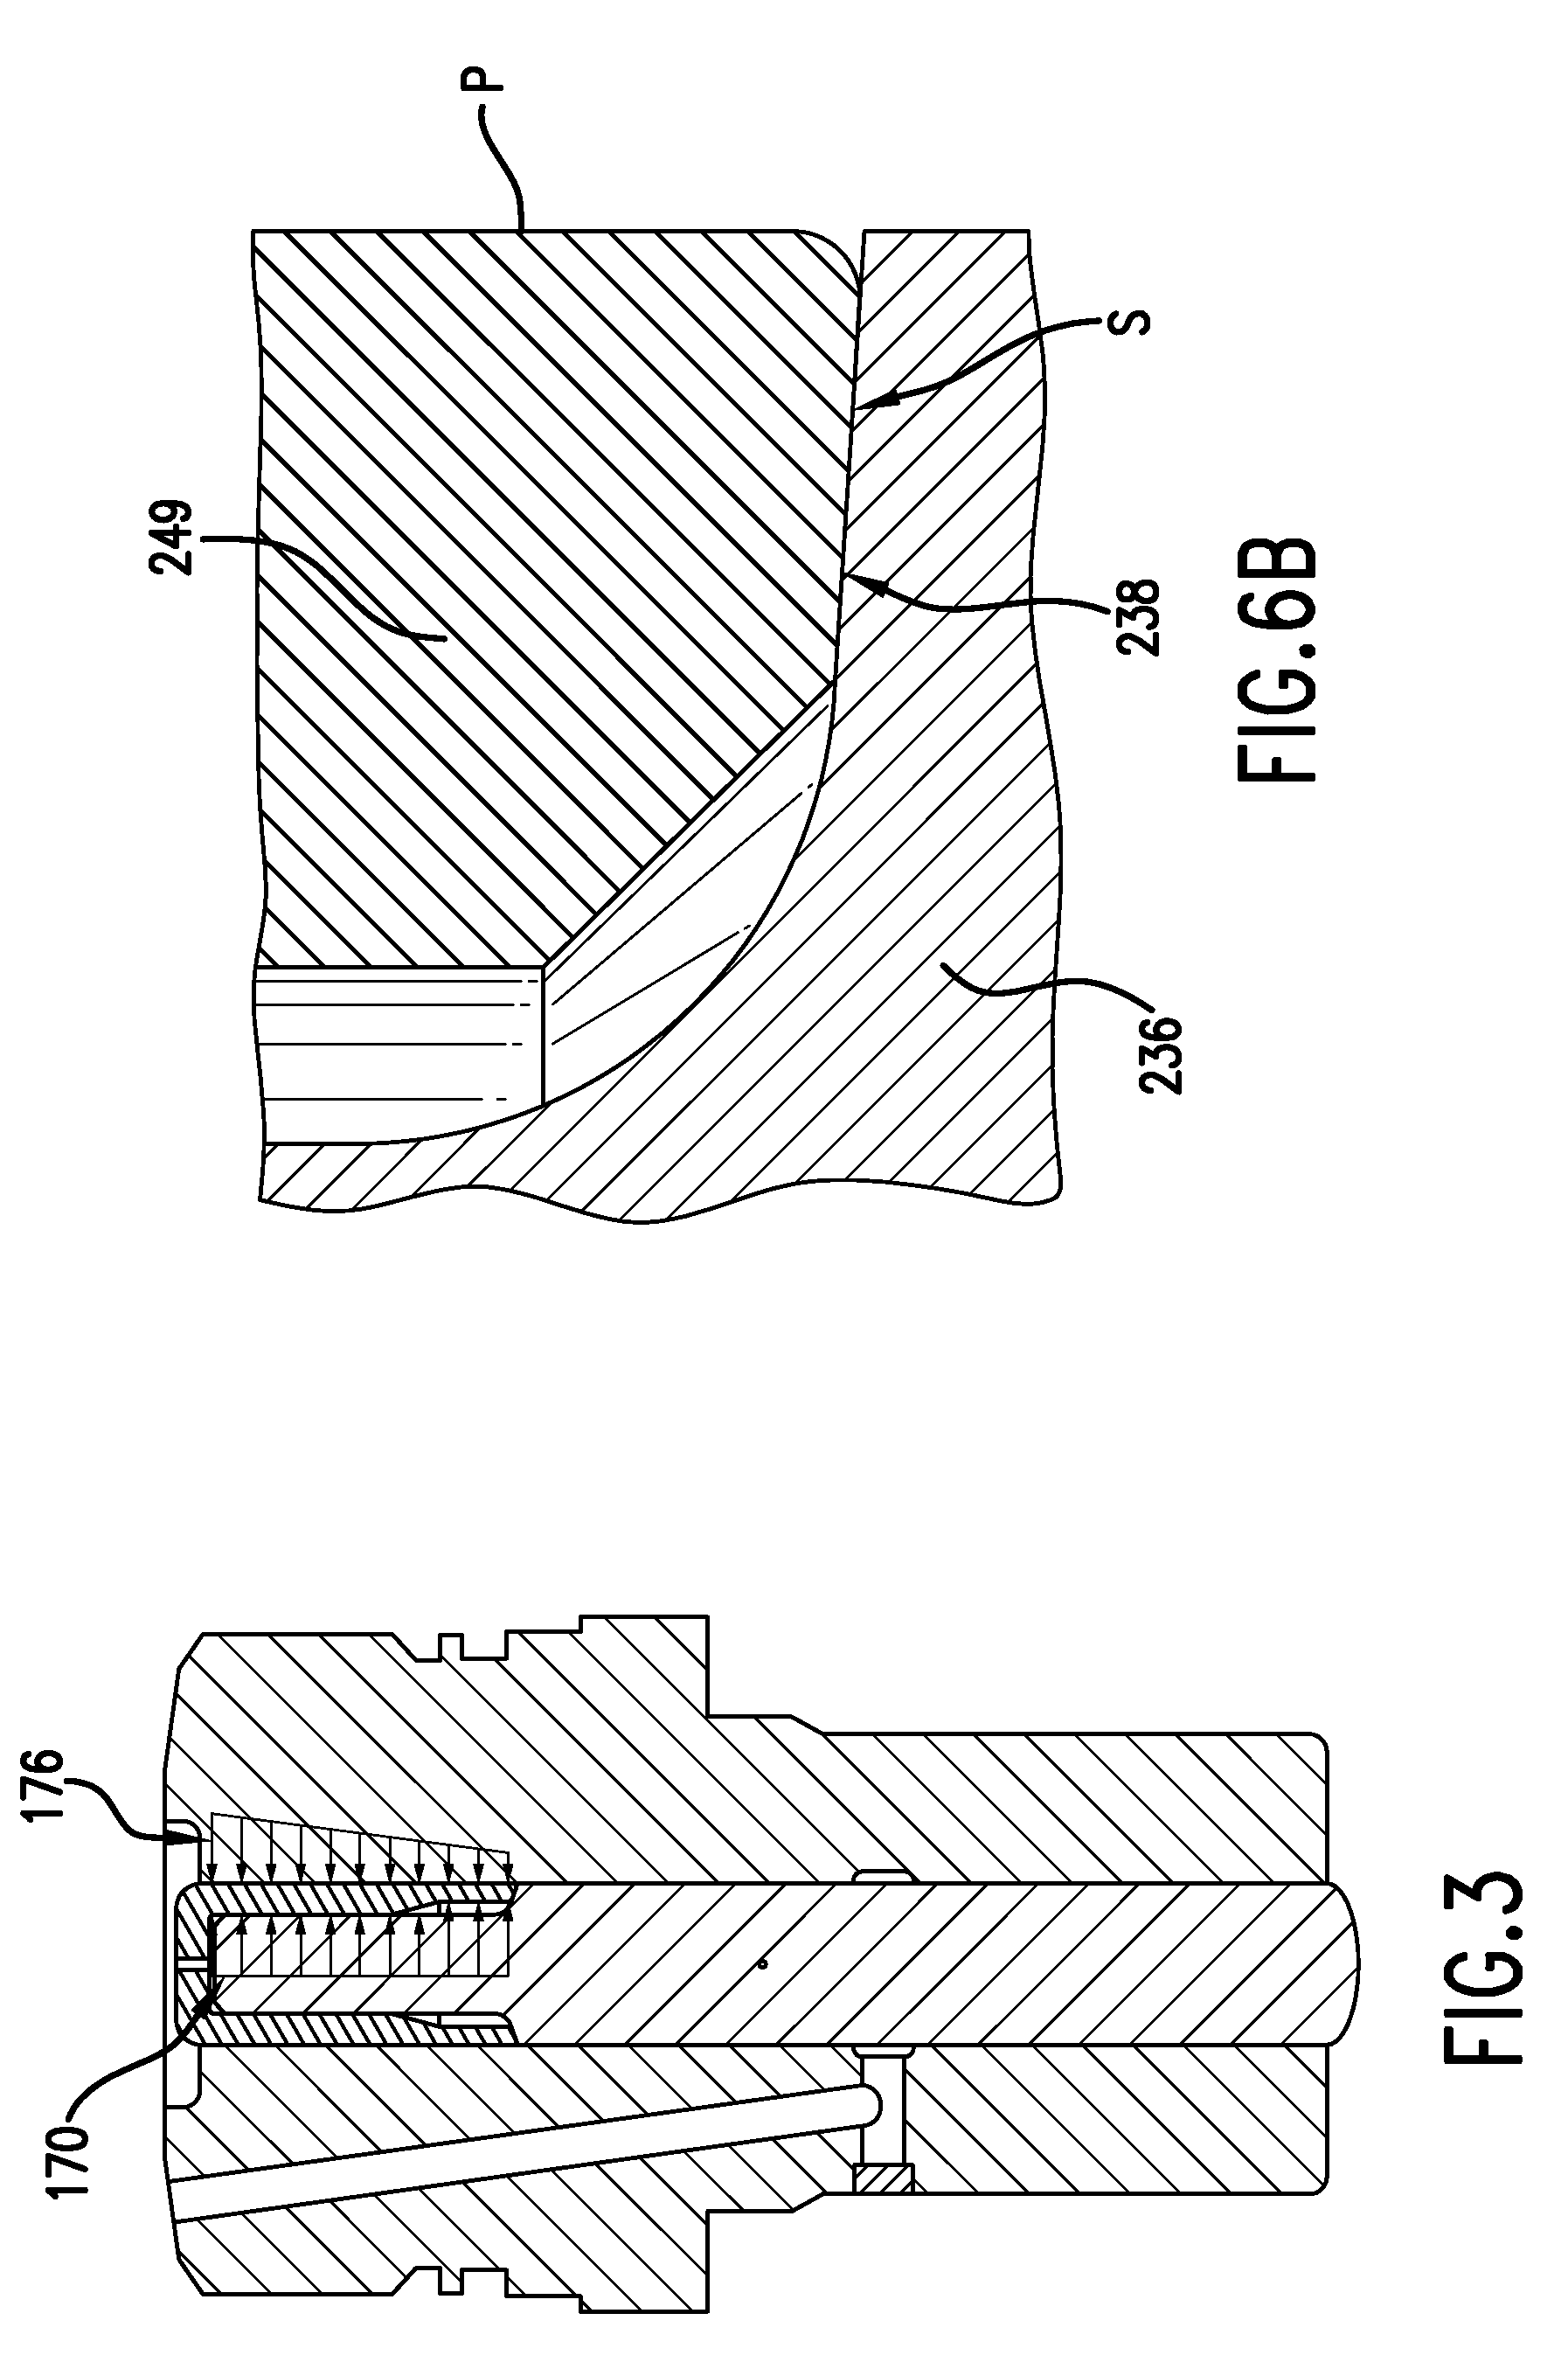 Low leakage plunger assembly for a high pressure fluid system